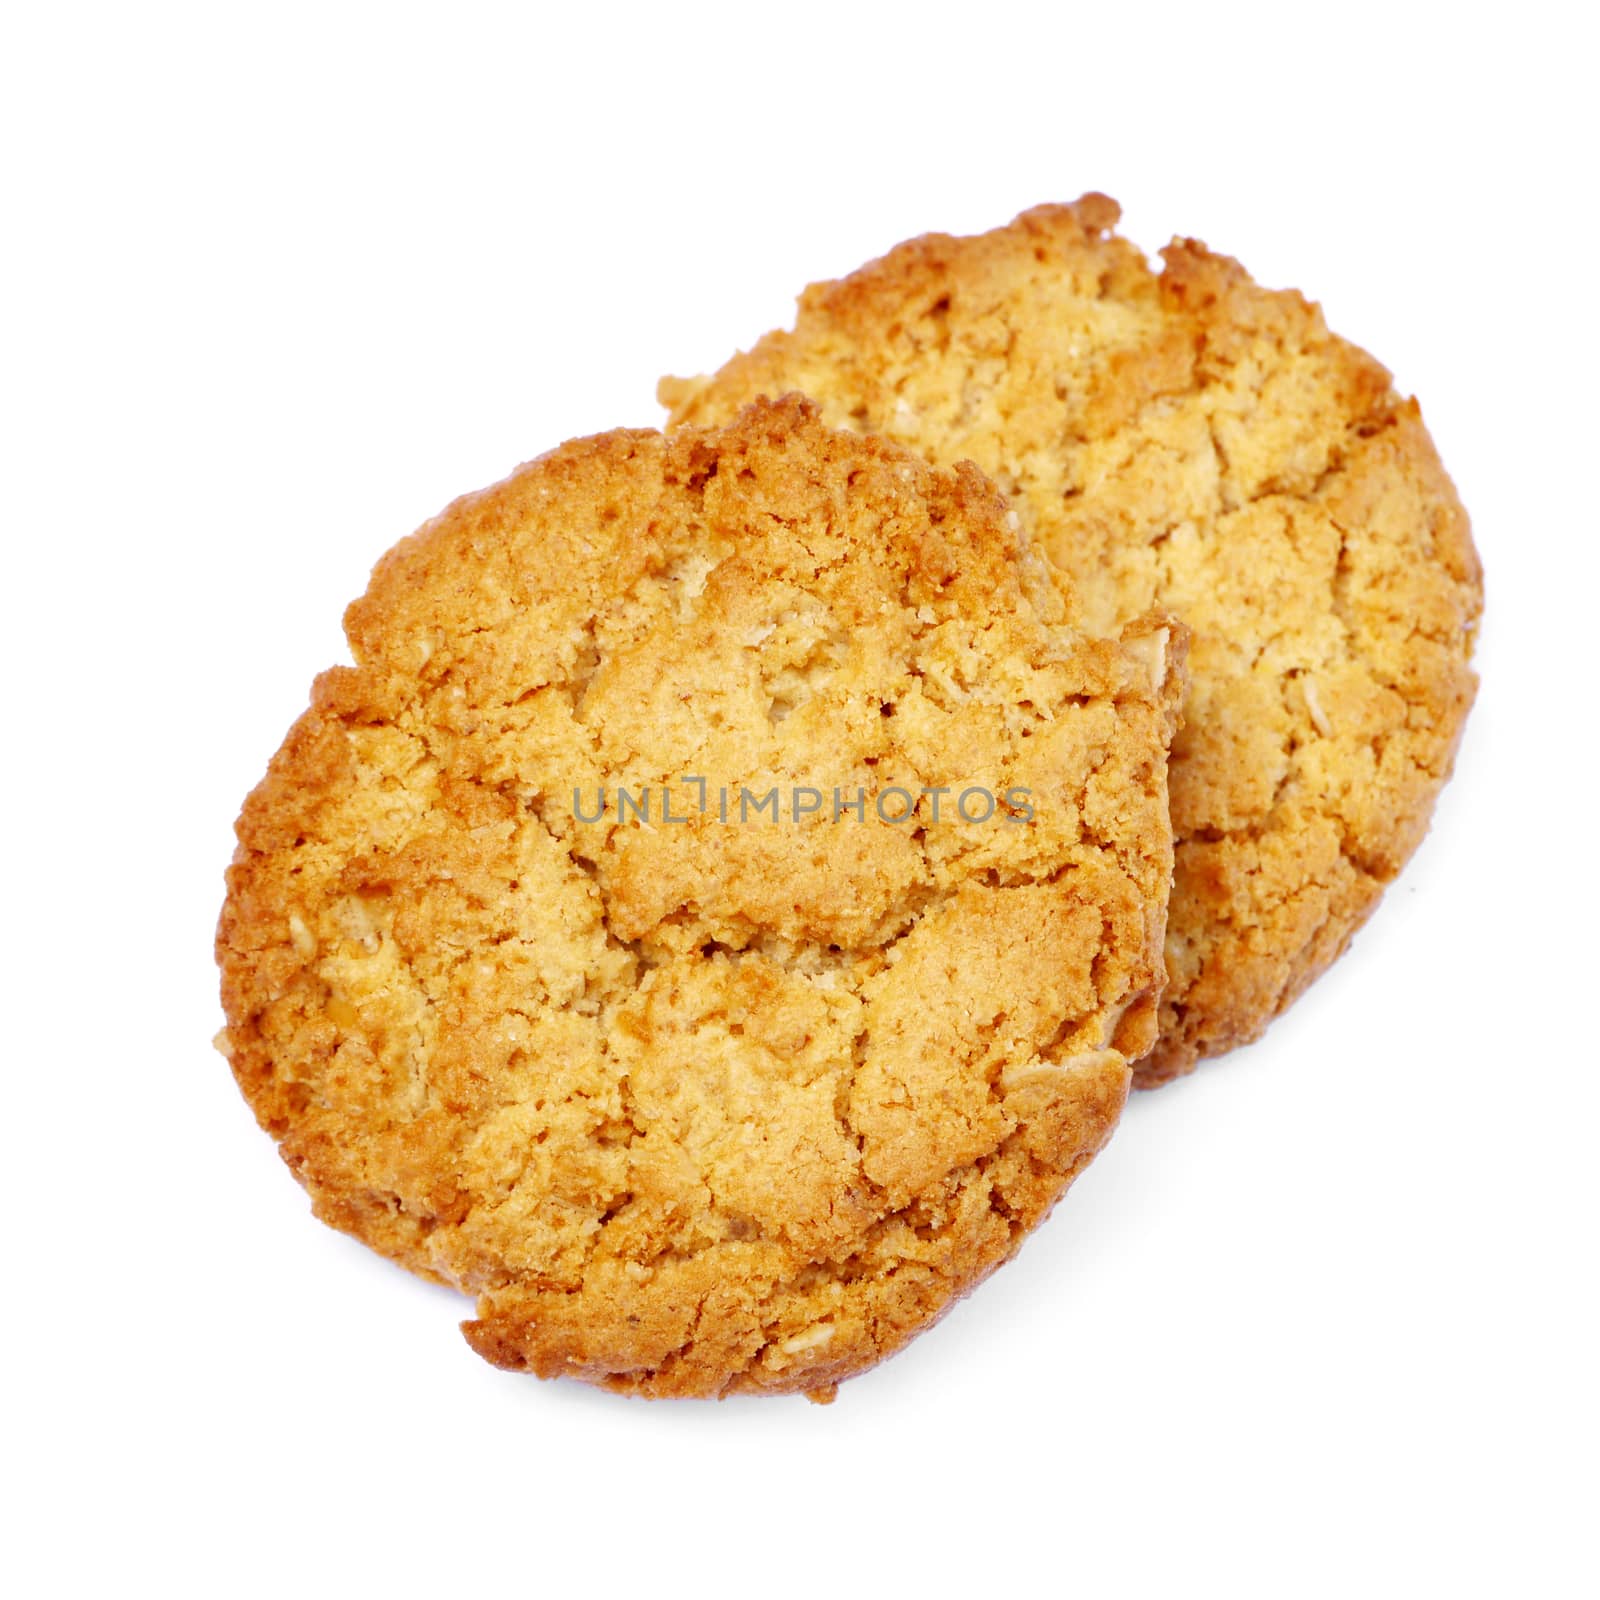 Cookies on a white background.